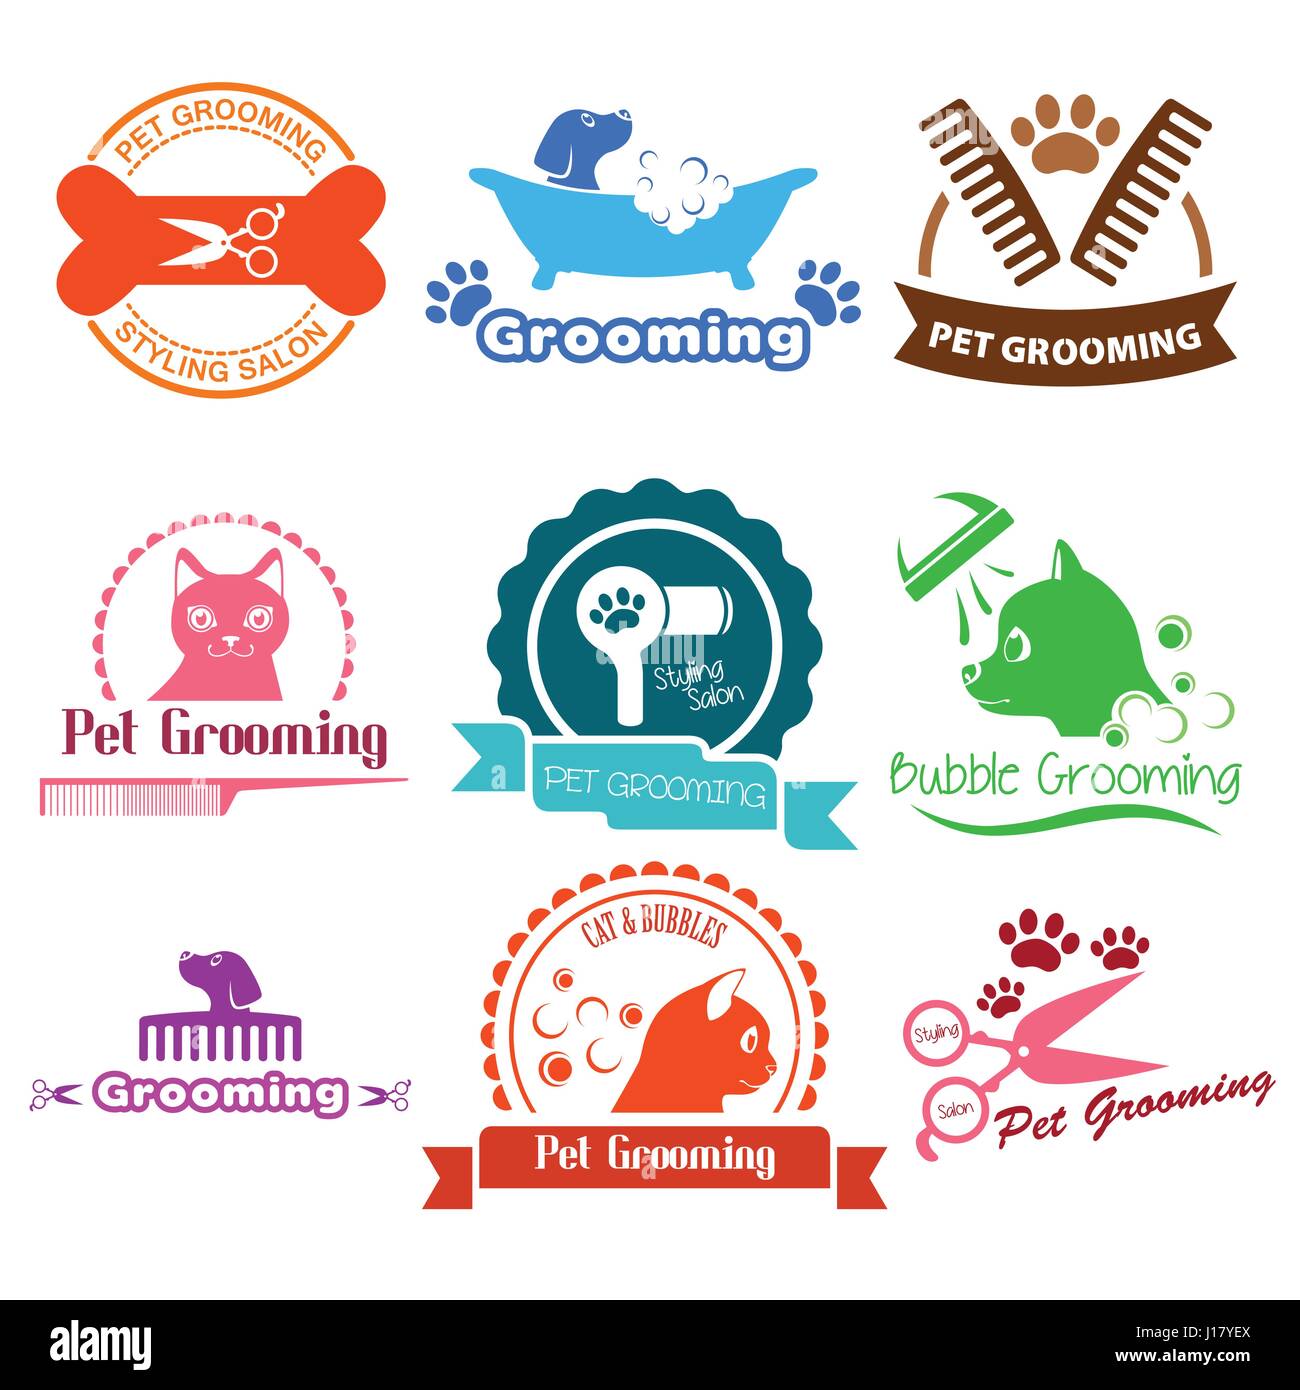 Dog Grooming & Cat Grooming Services